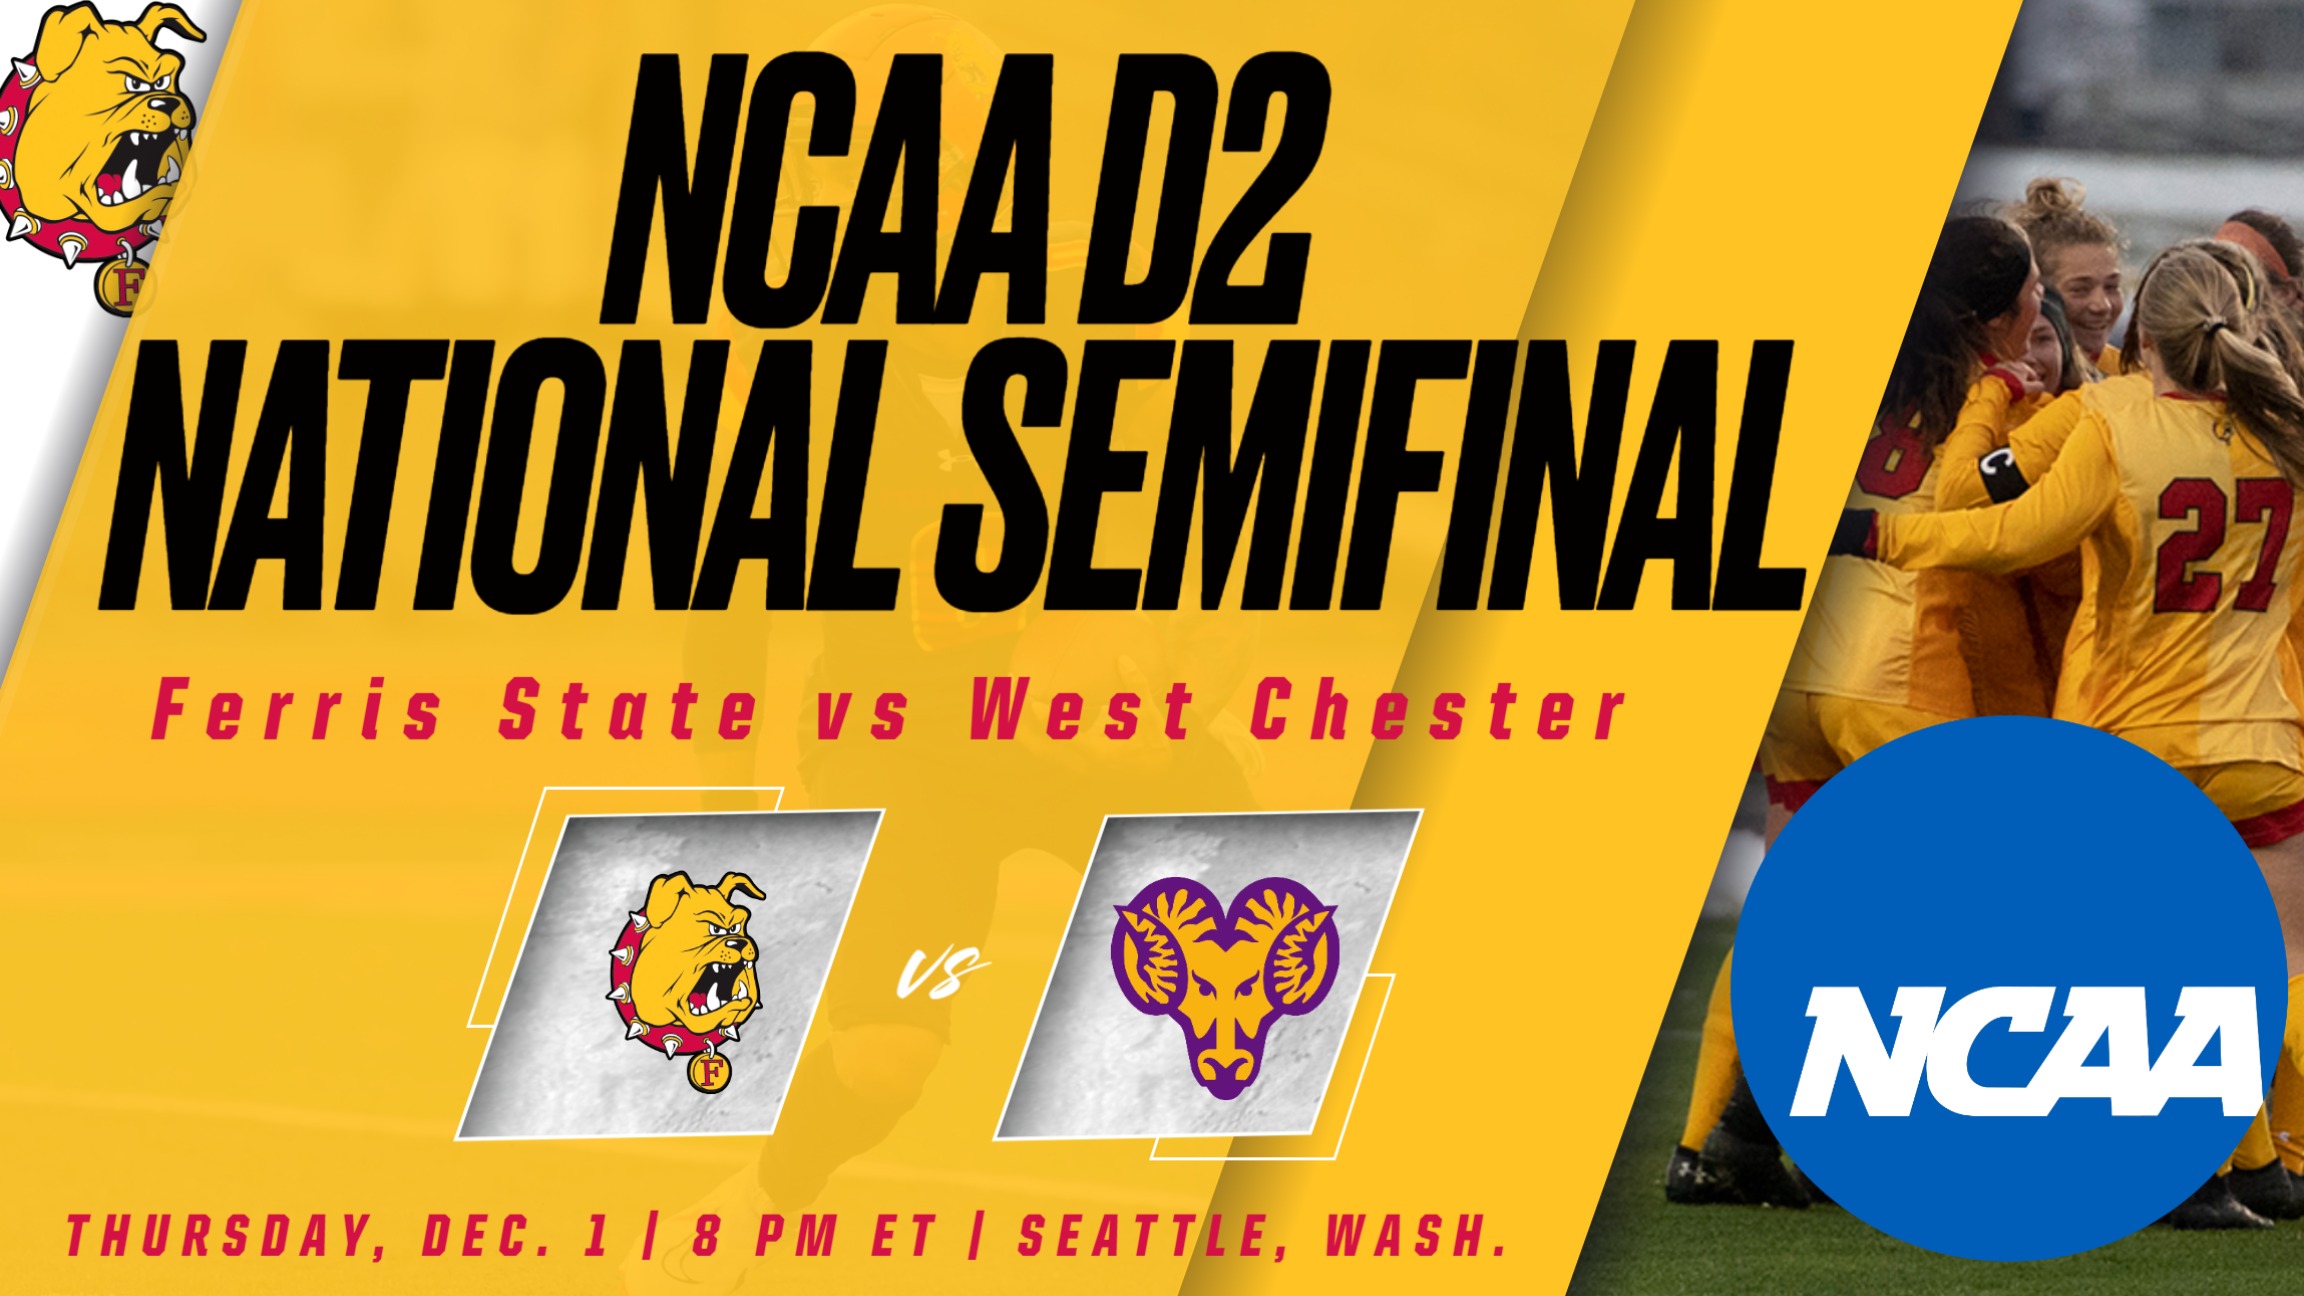 NATIONAL SEMIFINAL! Ferris State Soccer Faces West Chester On Thursday Night In Seattle